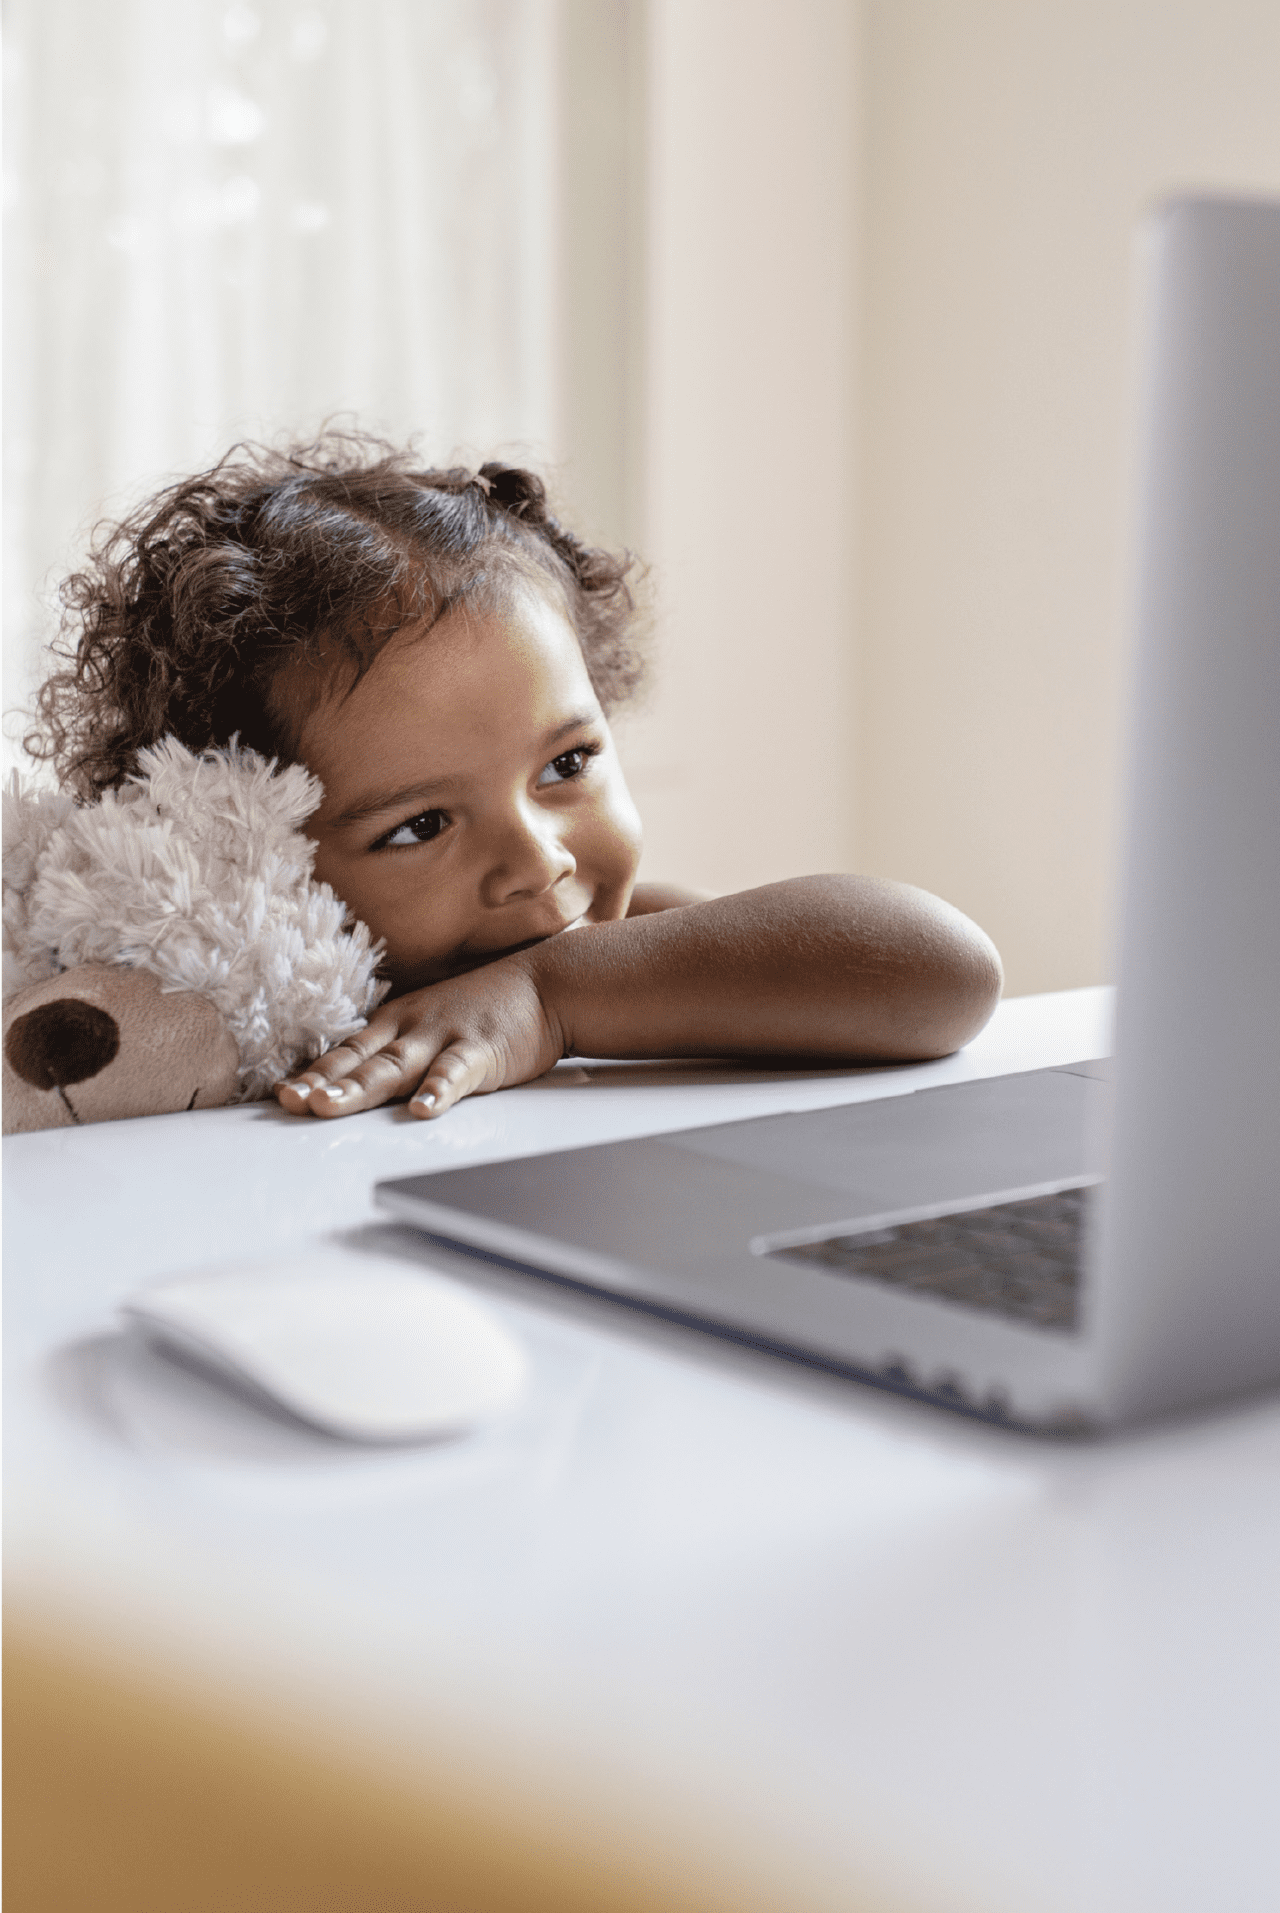 Small girl holds a teddy bear and looks at a laptop screen.